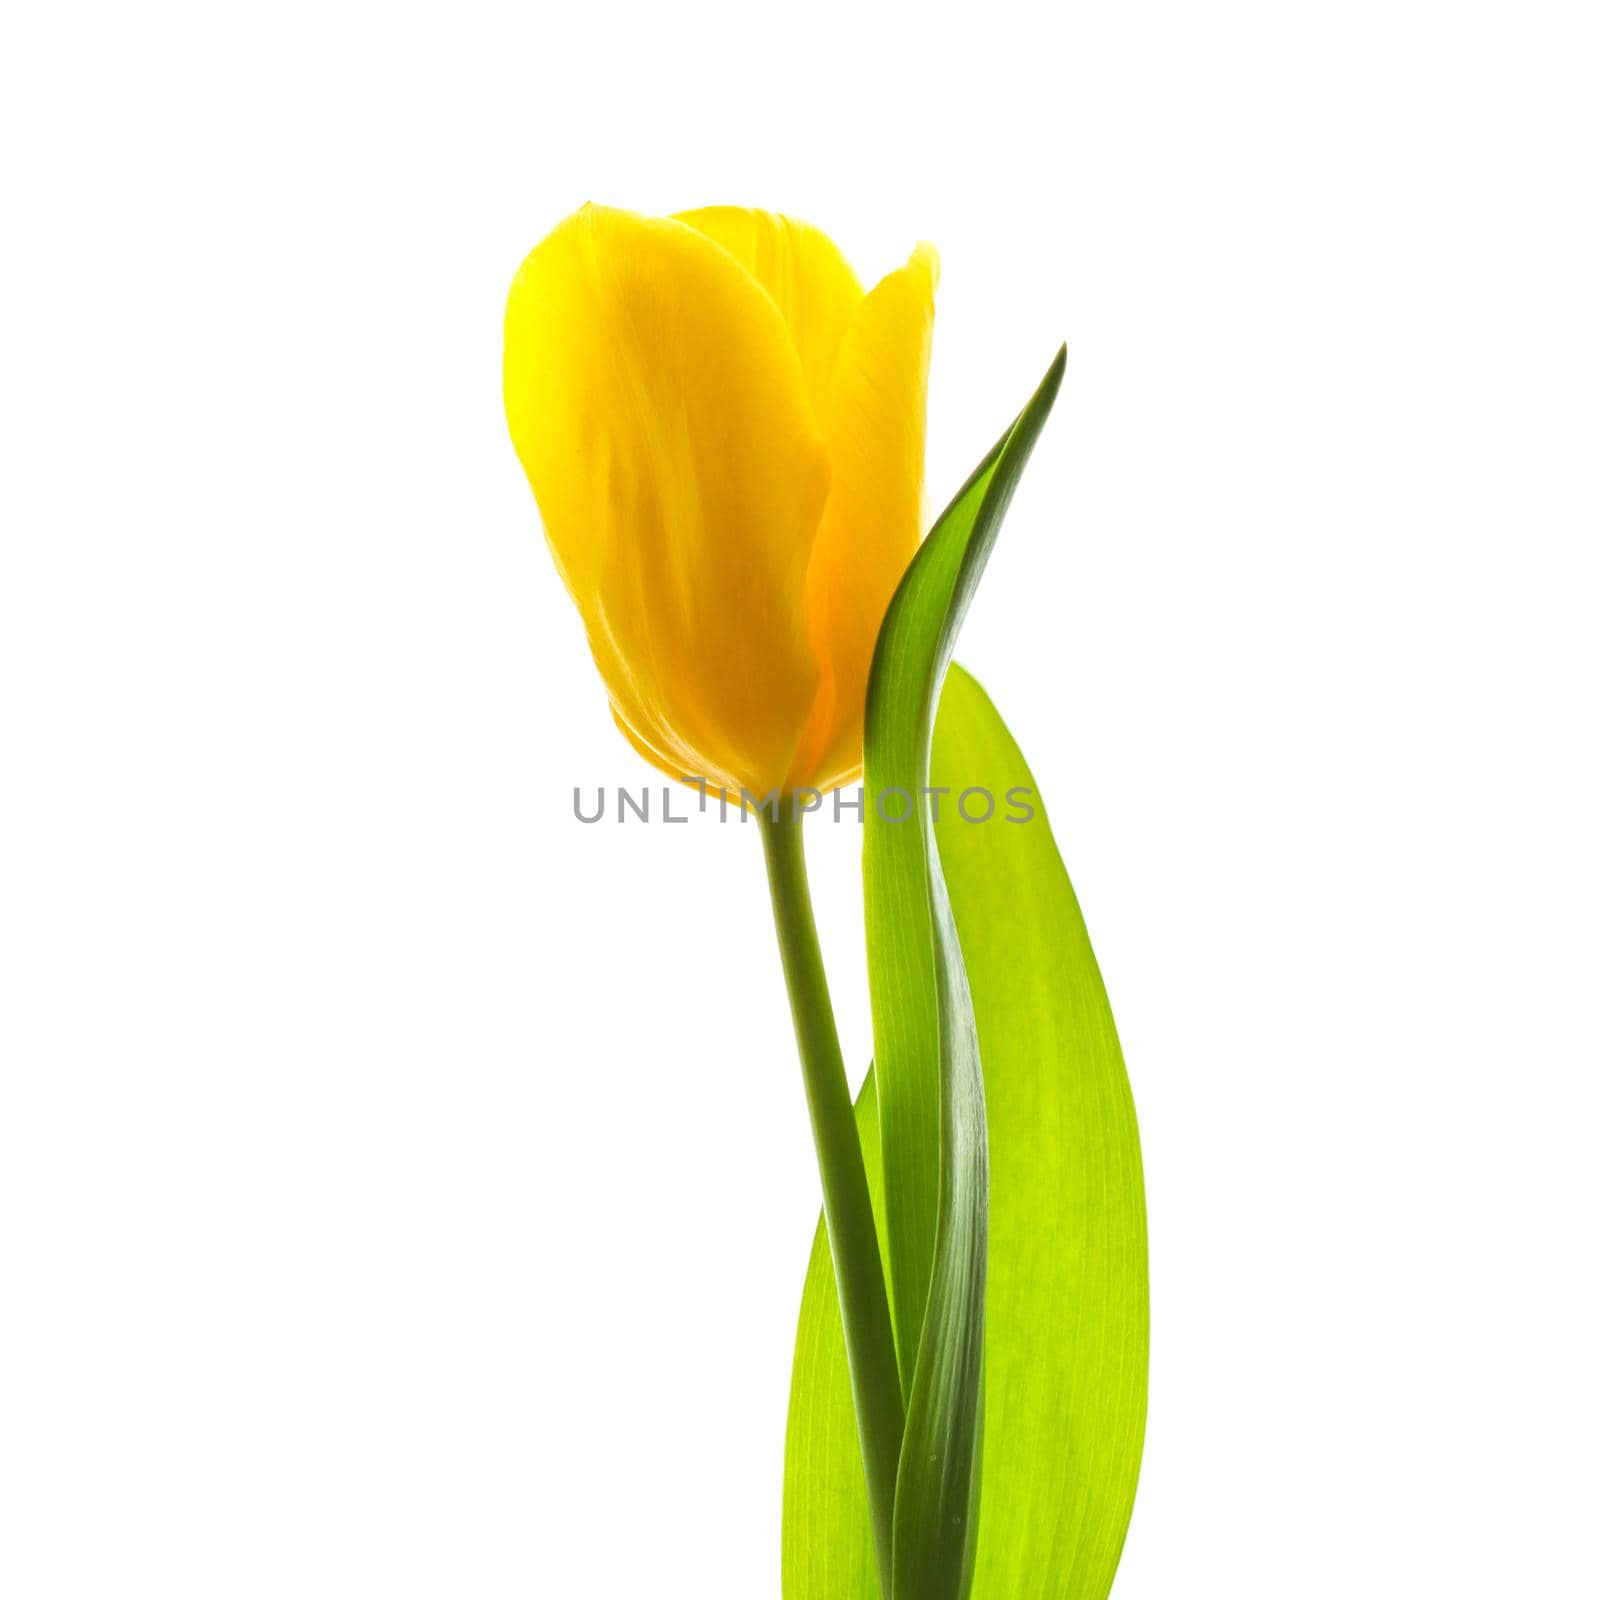 Yellow tulip lit by sunlight isolated on a white background. Perfect for greeting card.